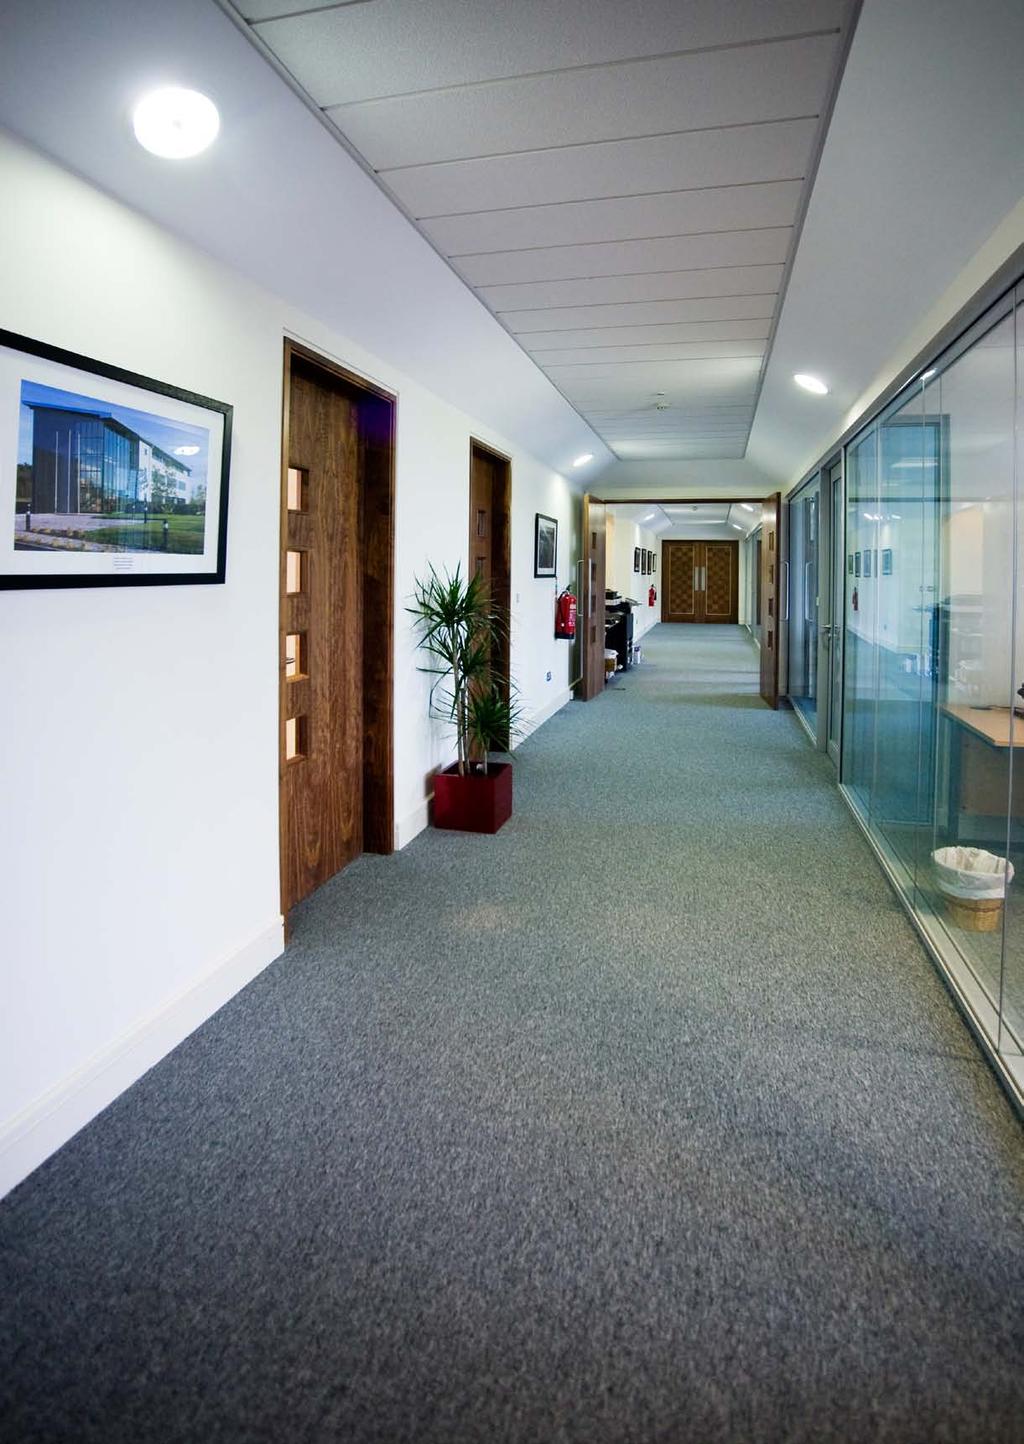 The landmark building offers up to 4,400 square metres of impressive open plan office accommodation in two blocks with basement car-parking, within the heart of Town, overlooking the River Barrow.